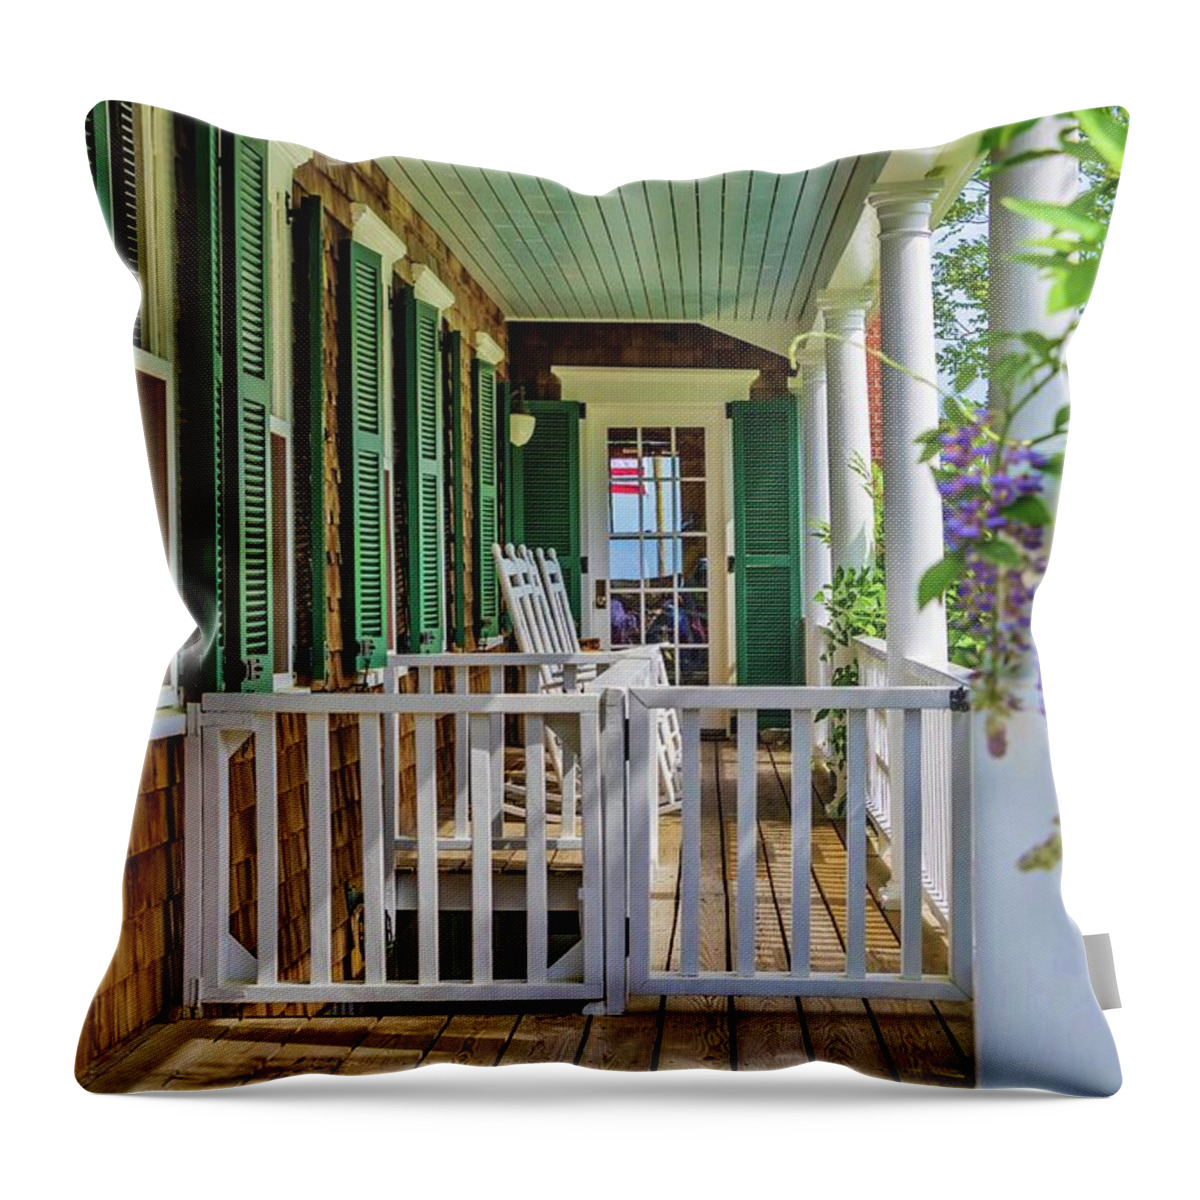 Provincetown Throw Pillow featuring the photograph Provincetown Porch by Marisa Geraghty Photography